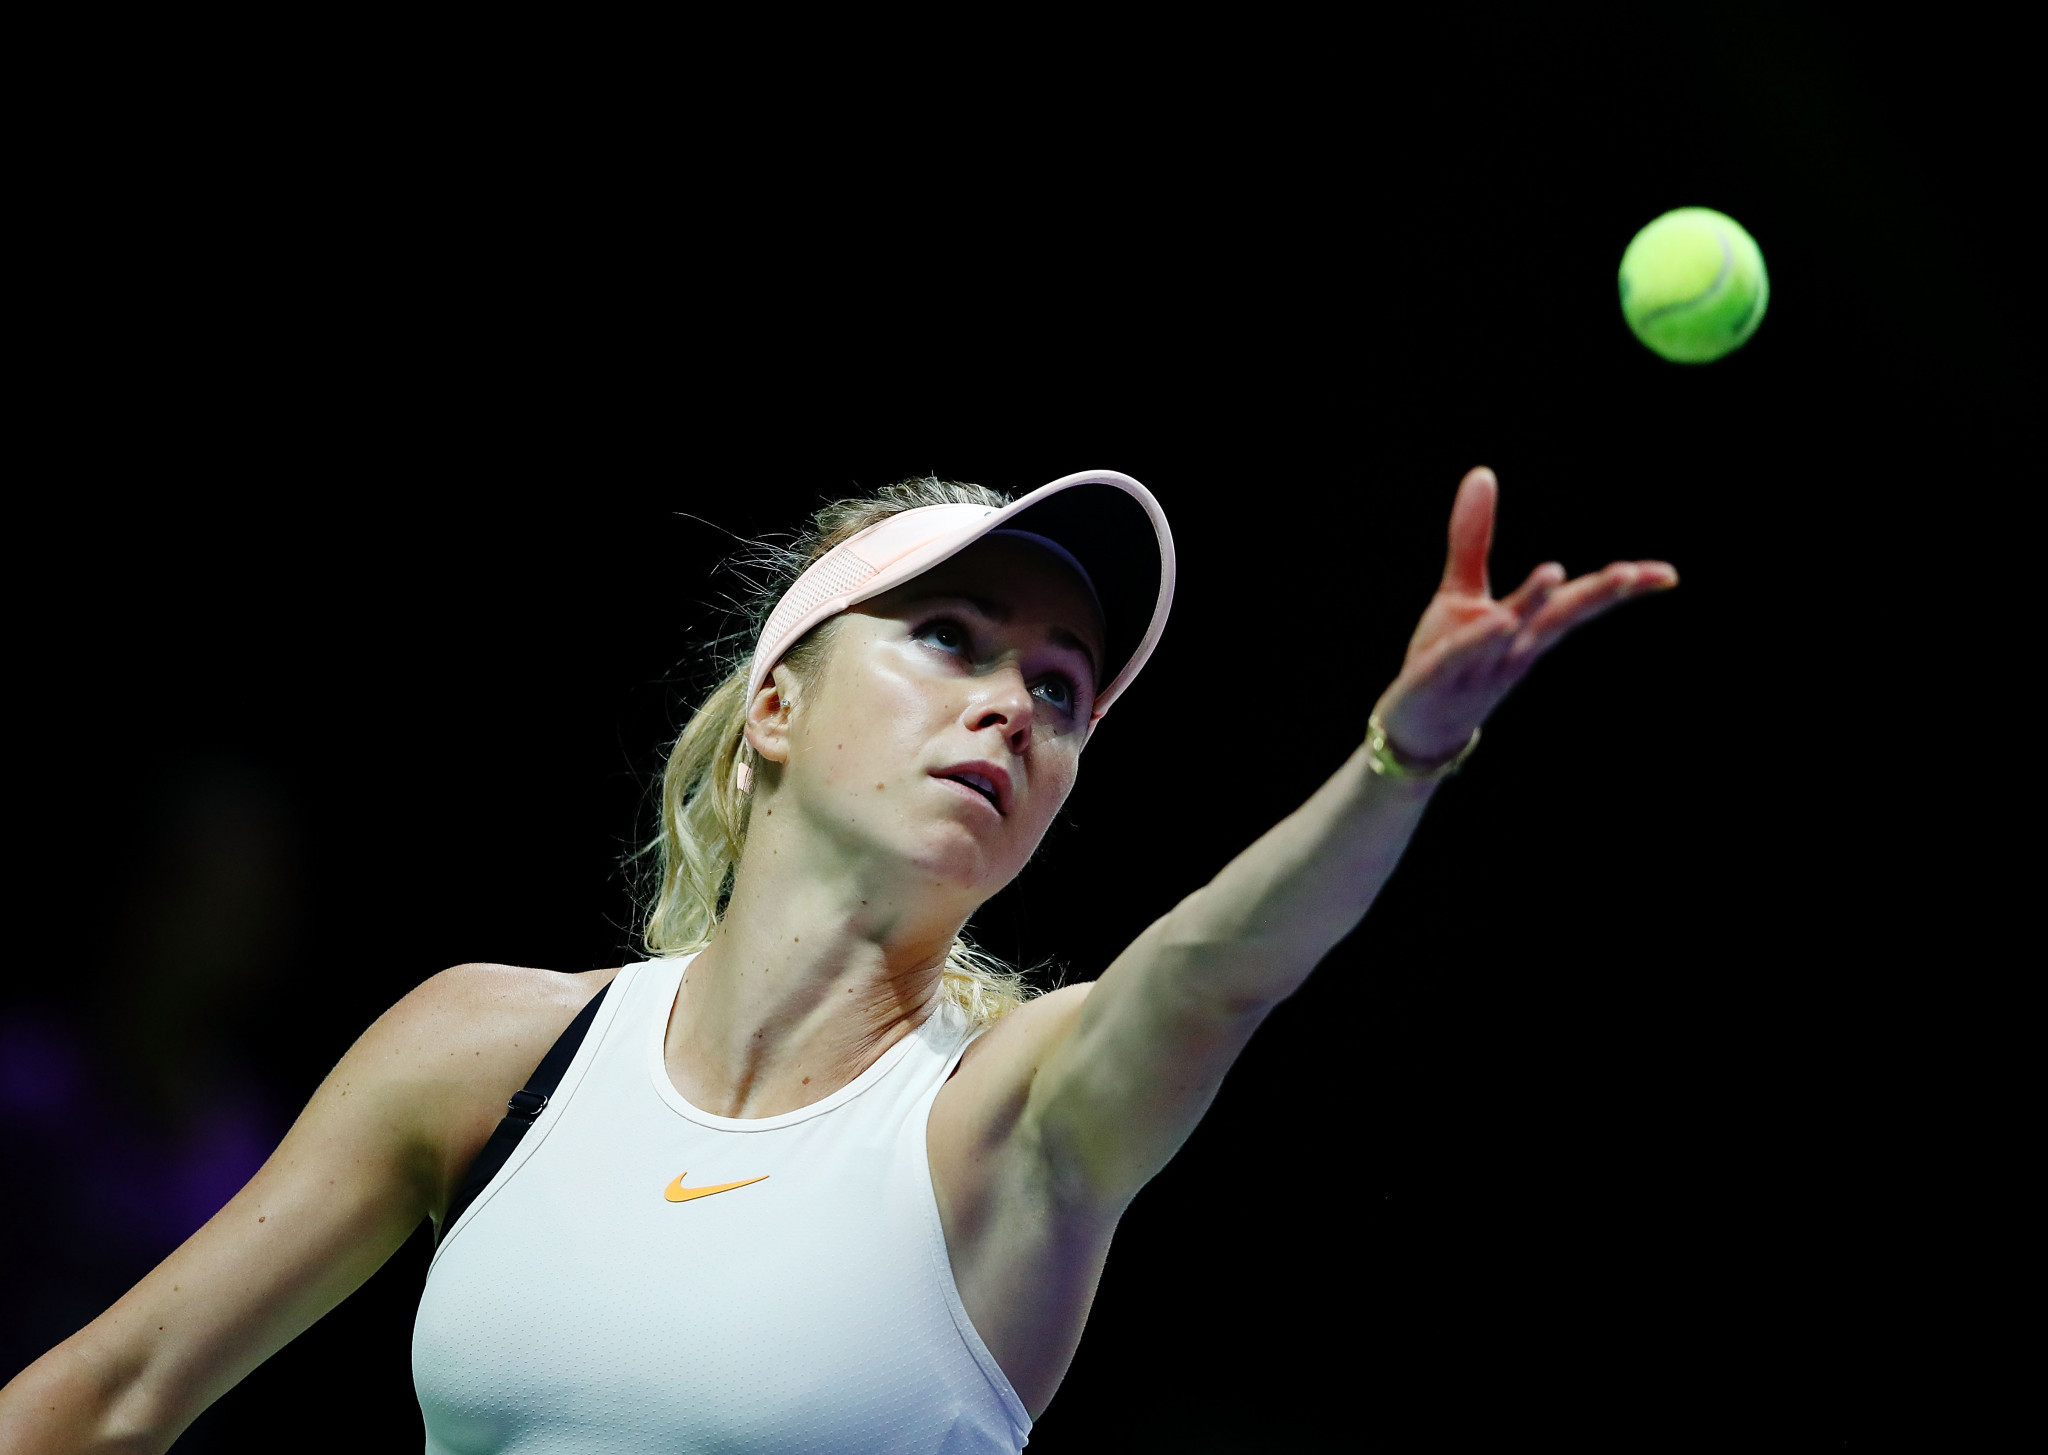 Elina Svitolina of Ukraine beat Petra Kvitová of the Czech Republic at the WTA Finals in Singapore ©Getty Images 